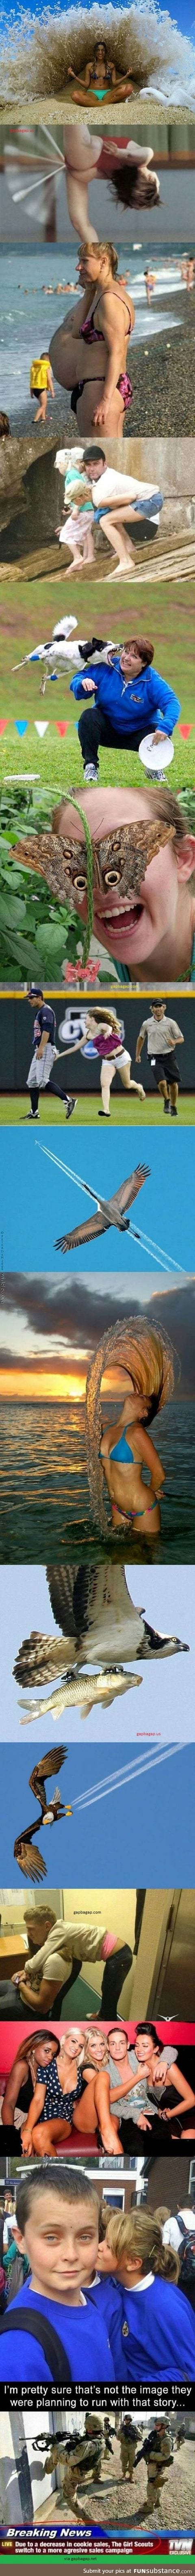 Perfectly timed photos